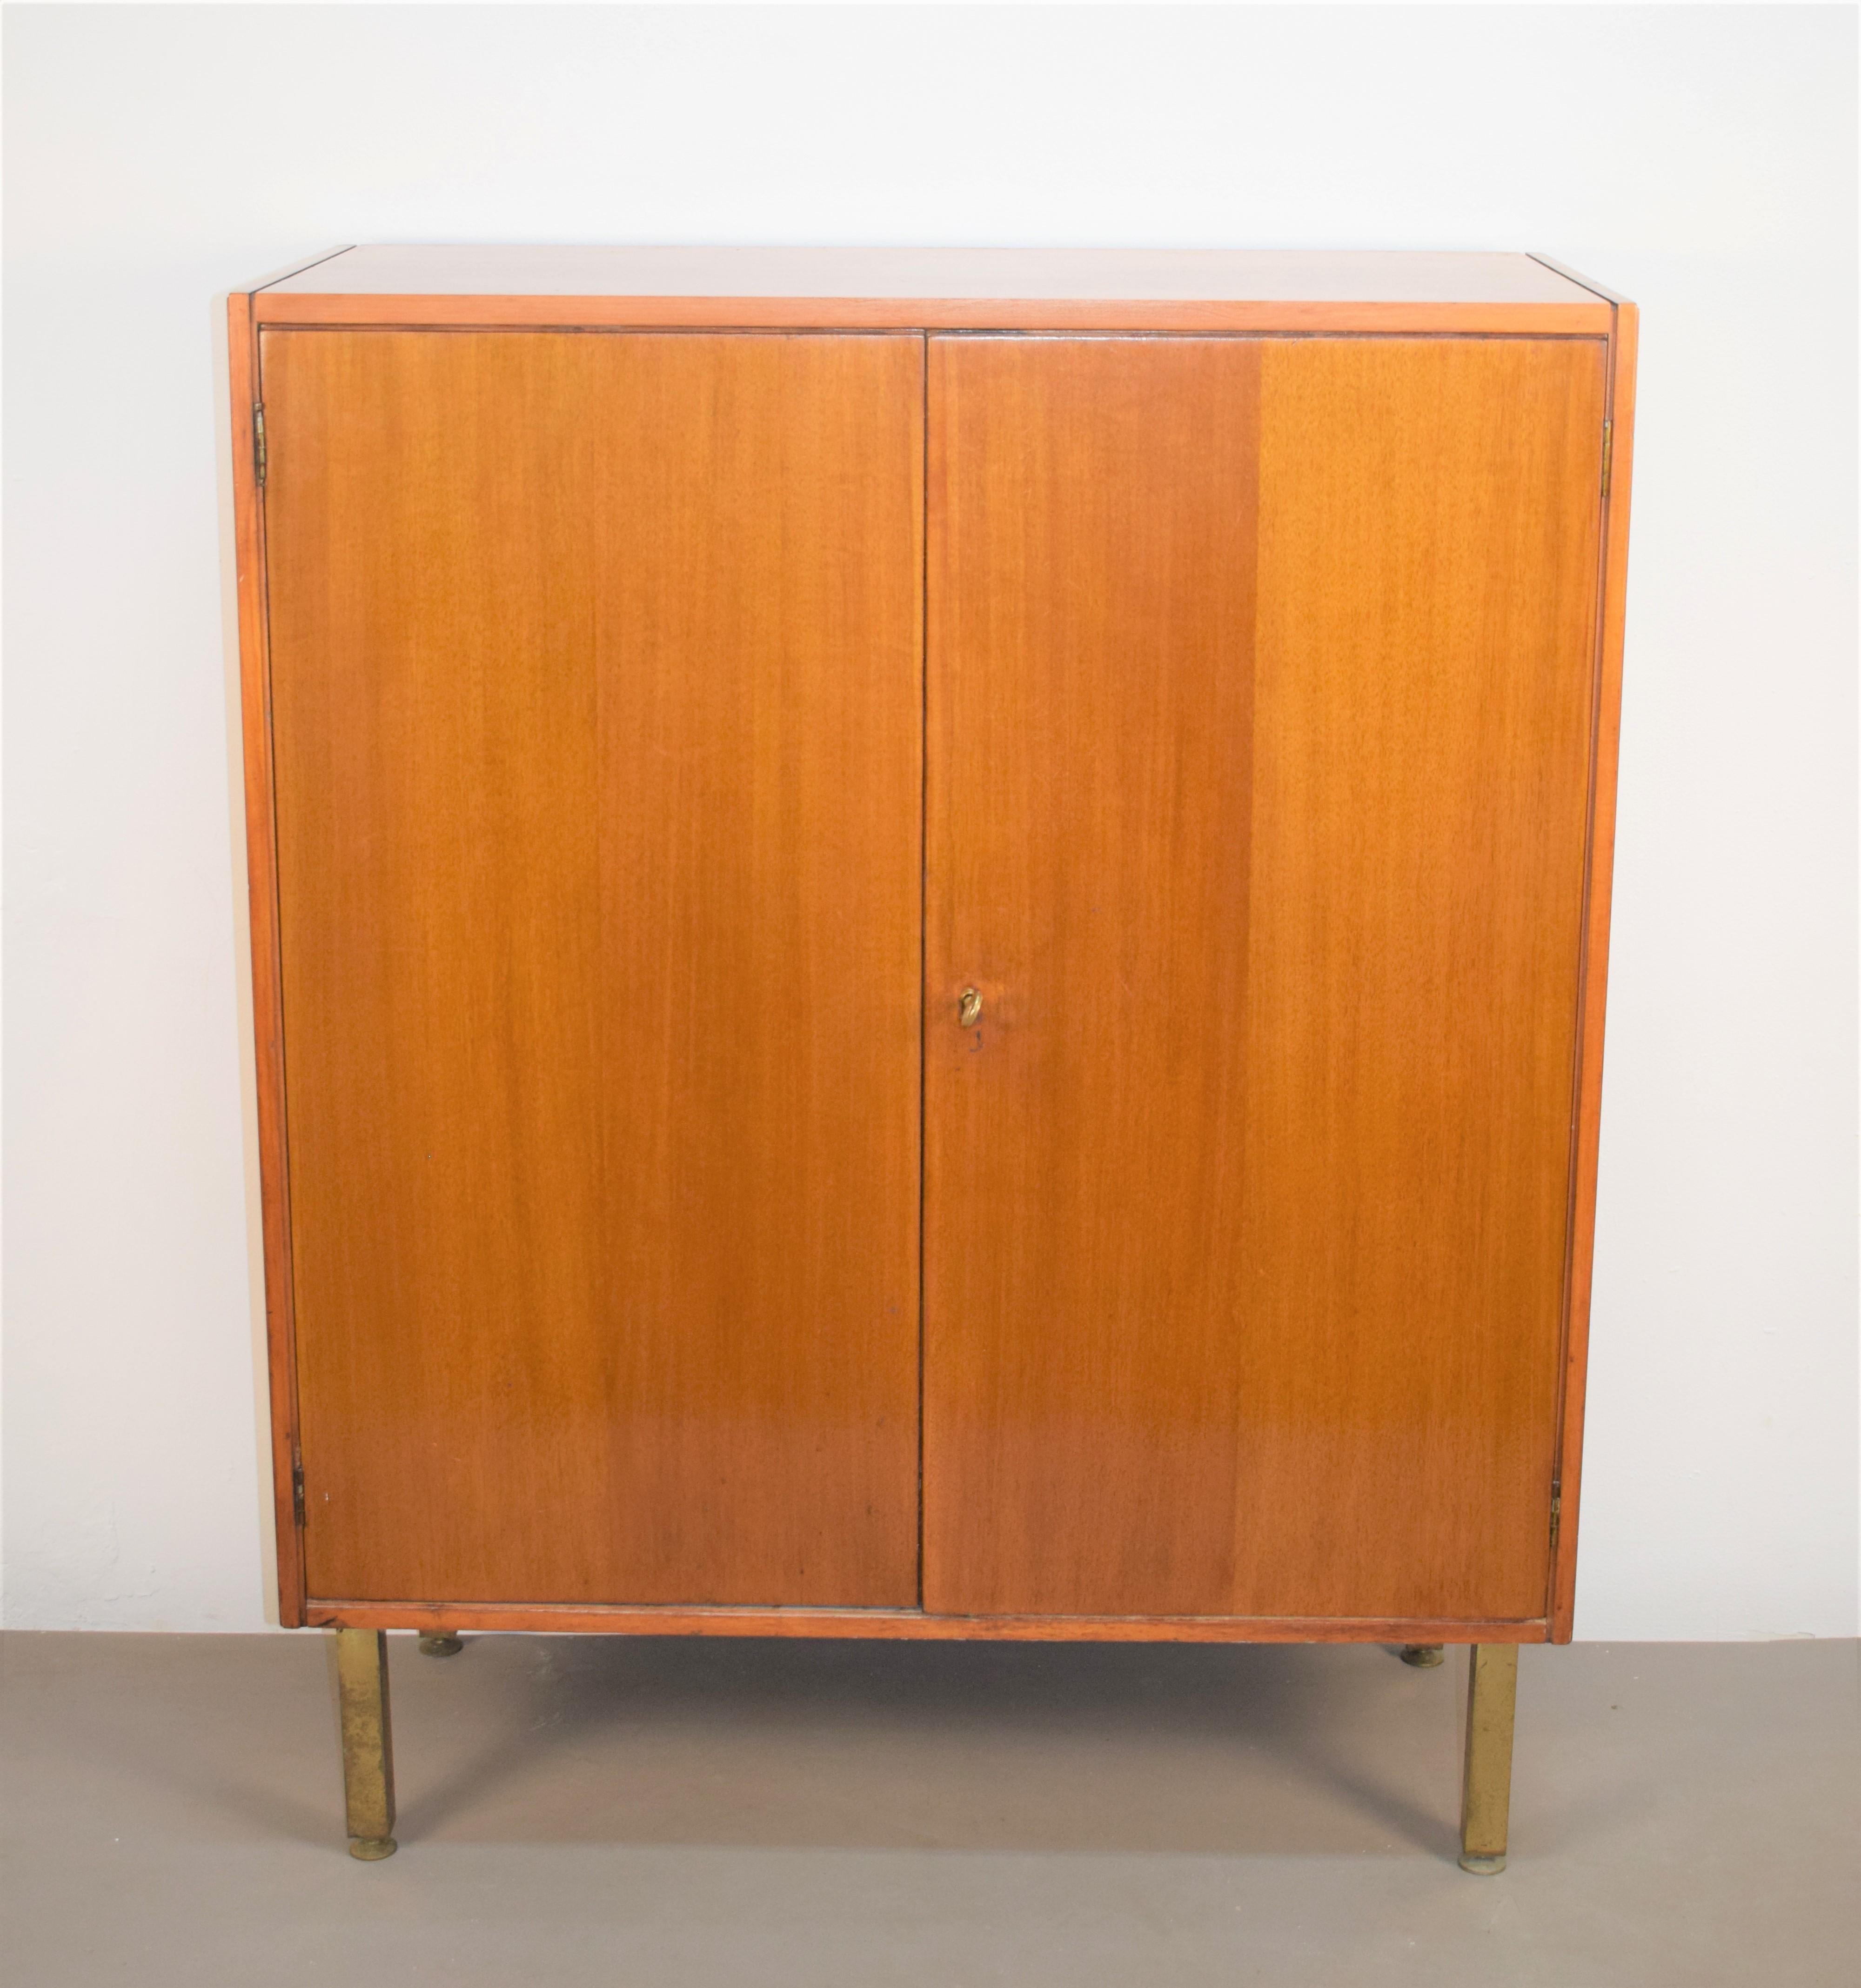 Italian wood and brass cabinet, 1960s.

Dimensions: H= 112 cm; W= 90 cm; D= 40 cm.